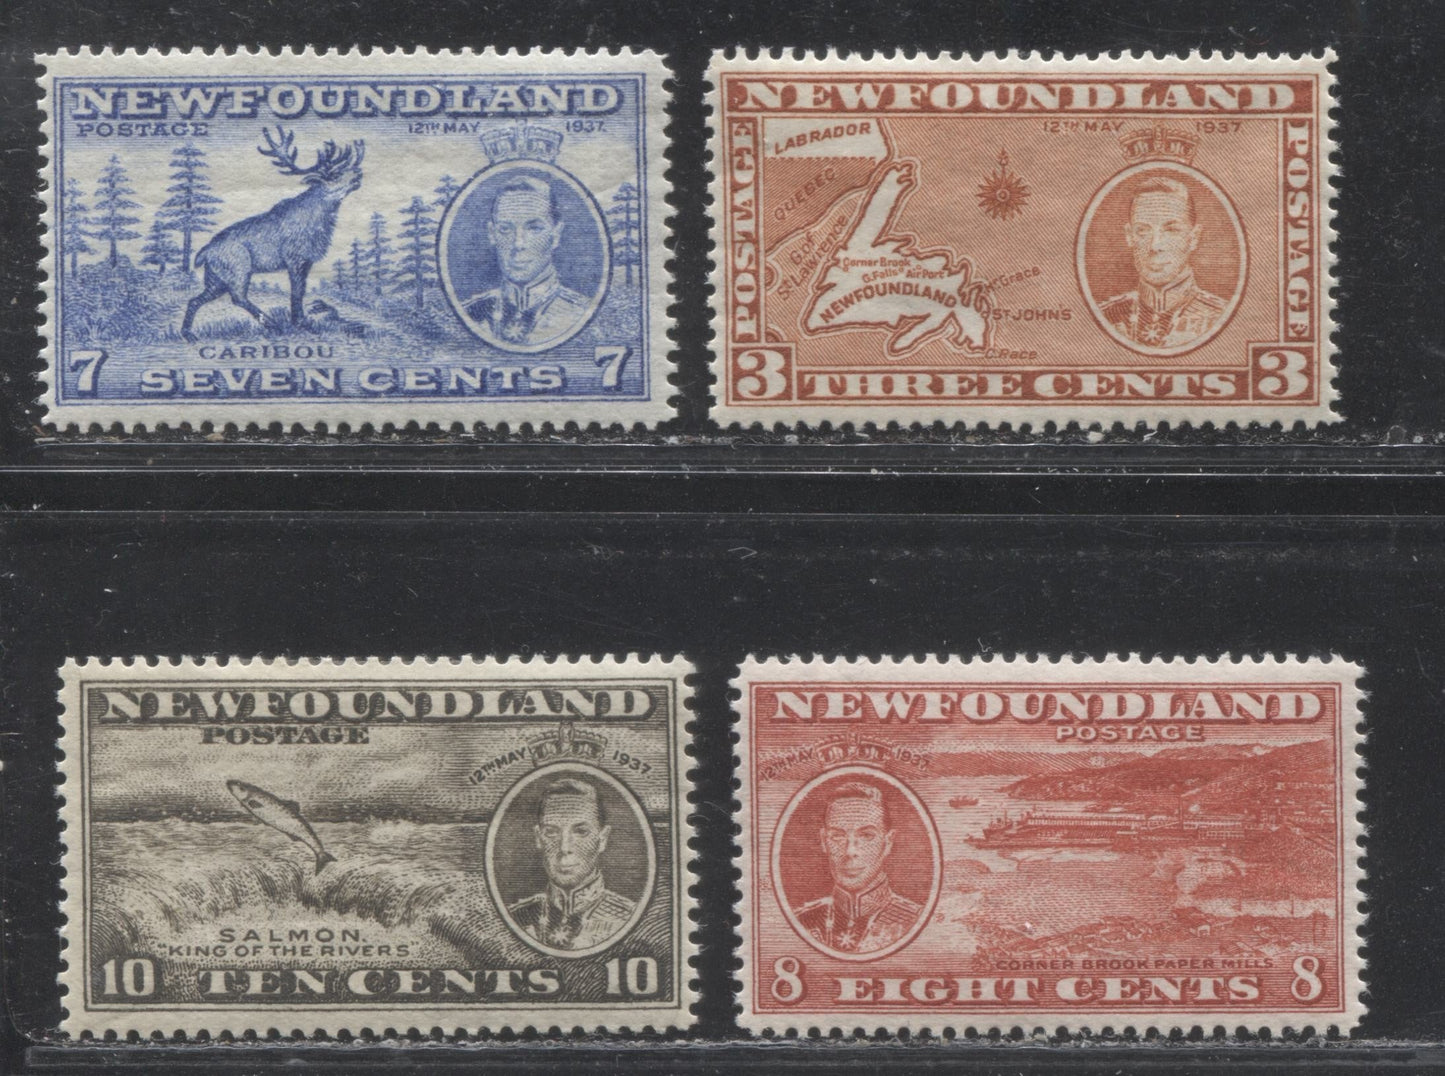 Lot 126 Newfoundland # 234-236, 237b 3c - 10c Orange Brown - Agate King George VI & Map of Newfoundland - King George VI & Salmon Leaping Falls, 1937 Long Coronation Issue, Four VFNH Examples, Various Line and Comb Perfs